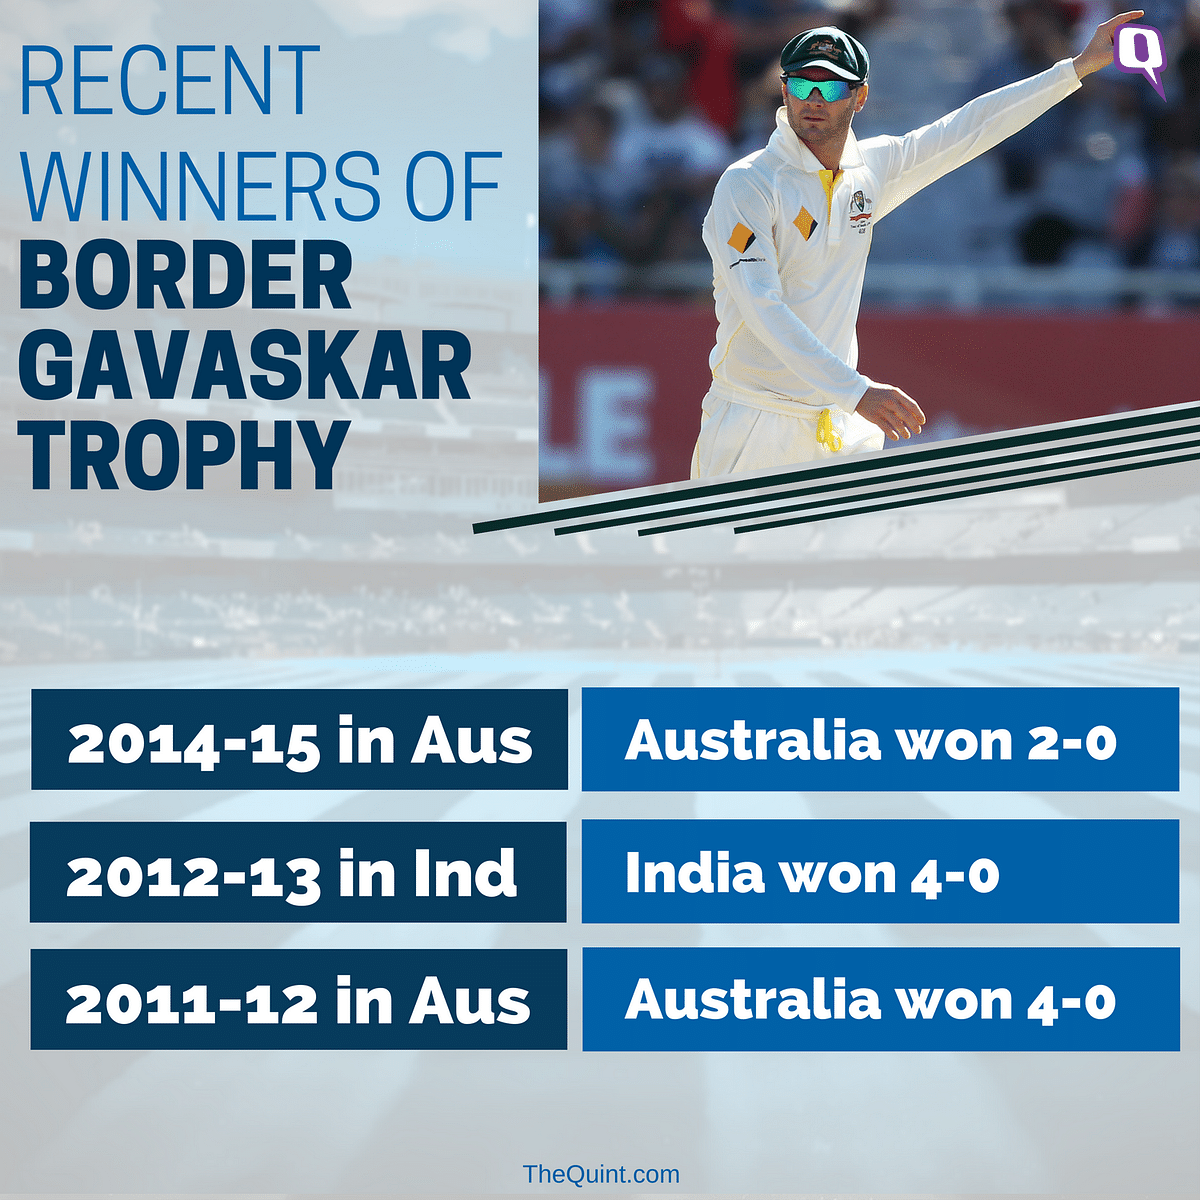 In Australia’s 800th Test, and the venue’s first - who will take the honours?